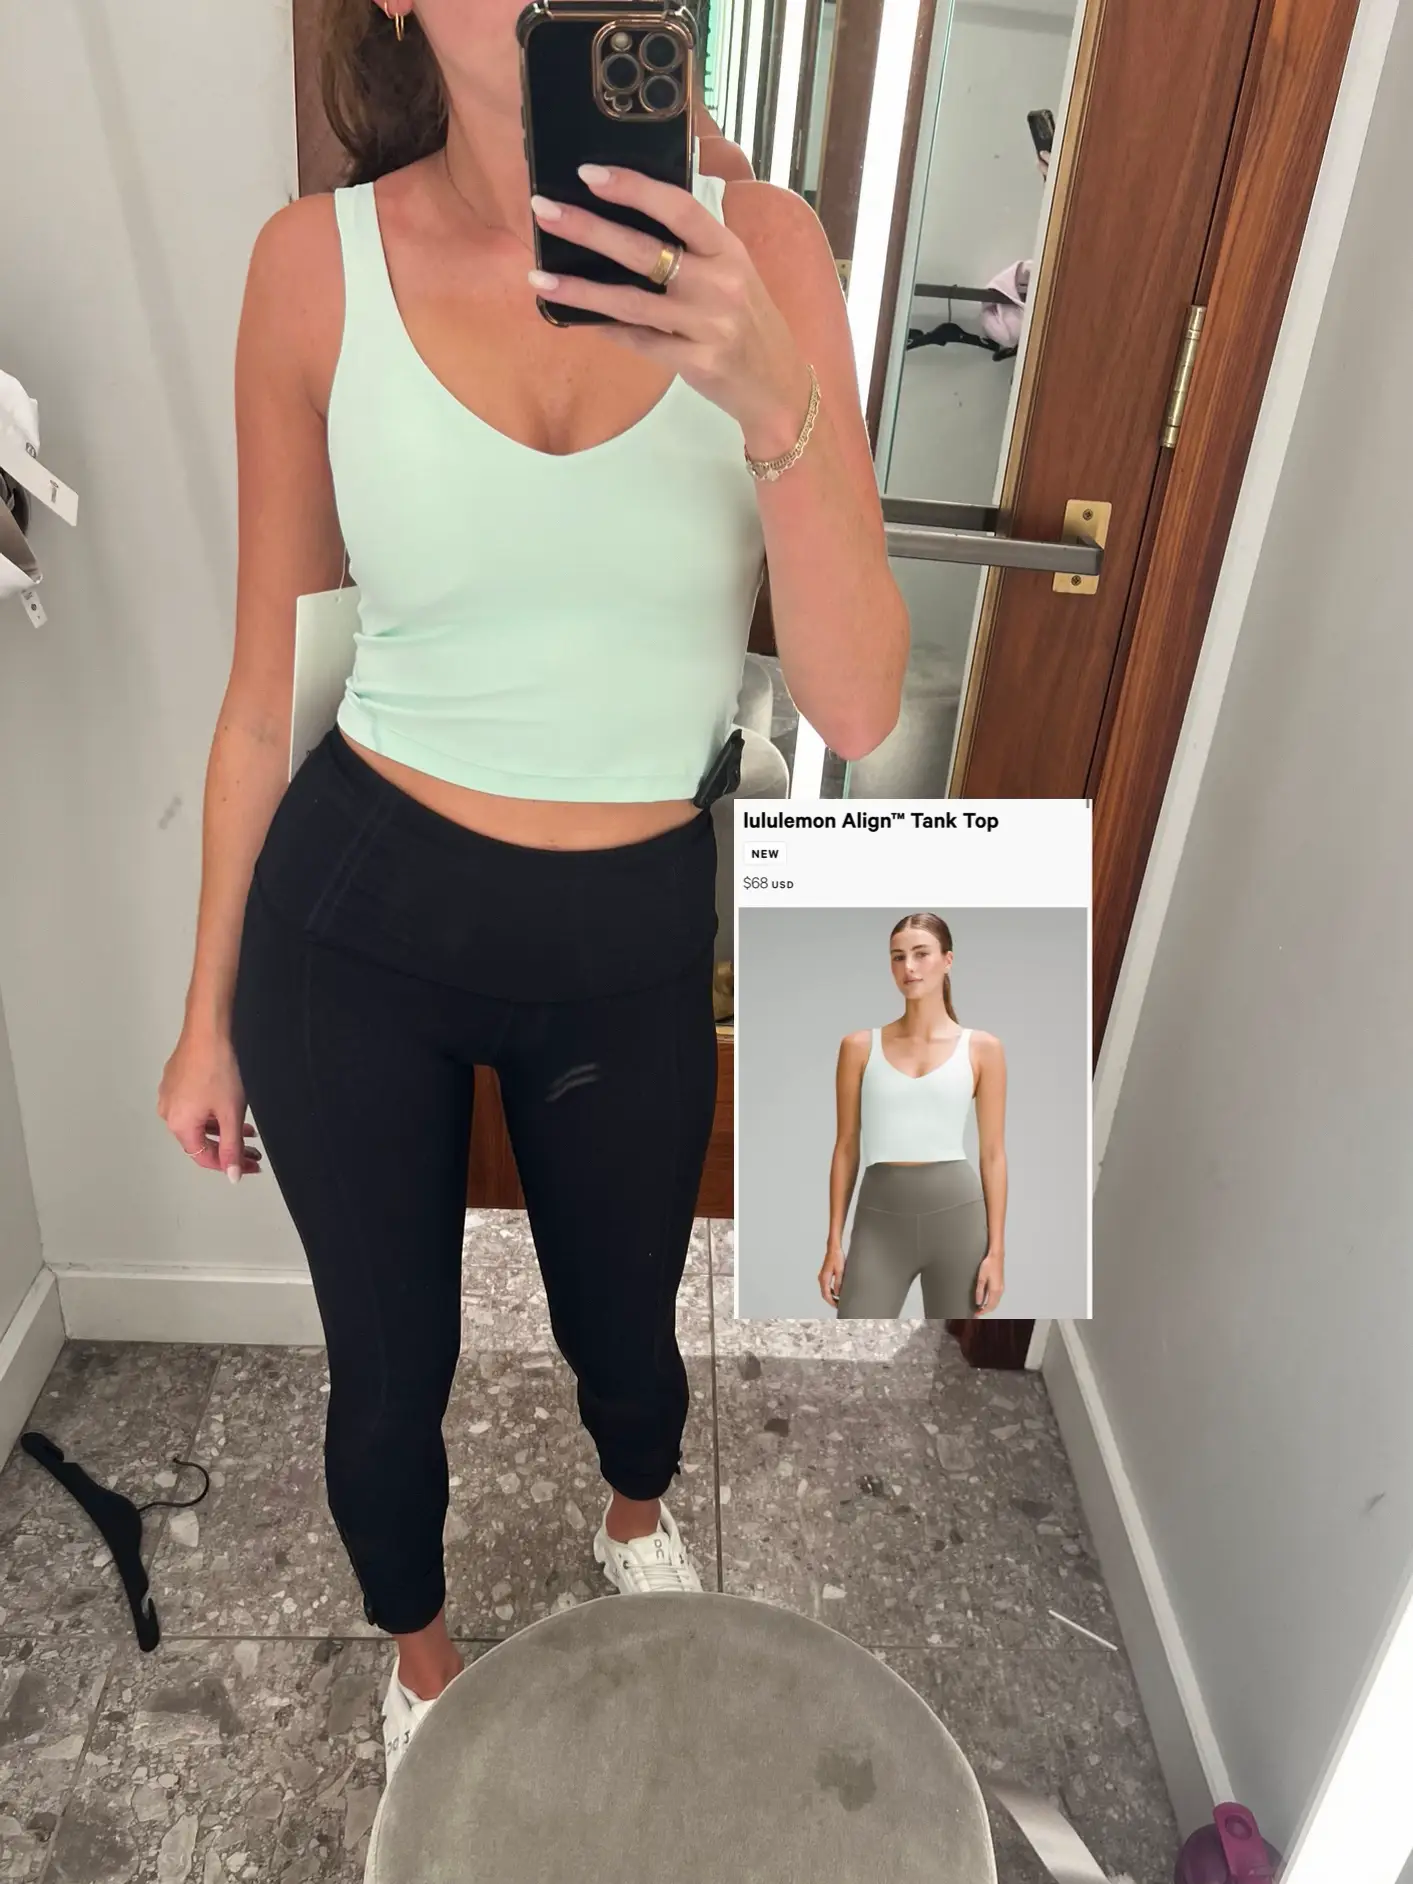 LULULEMON TRY-ON, Size 6-8 💜, Gallery posted by Hana Shaheen